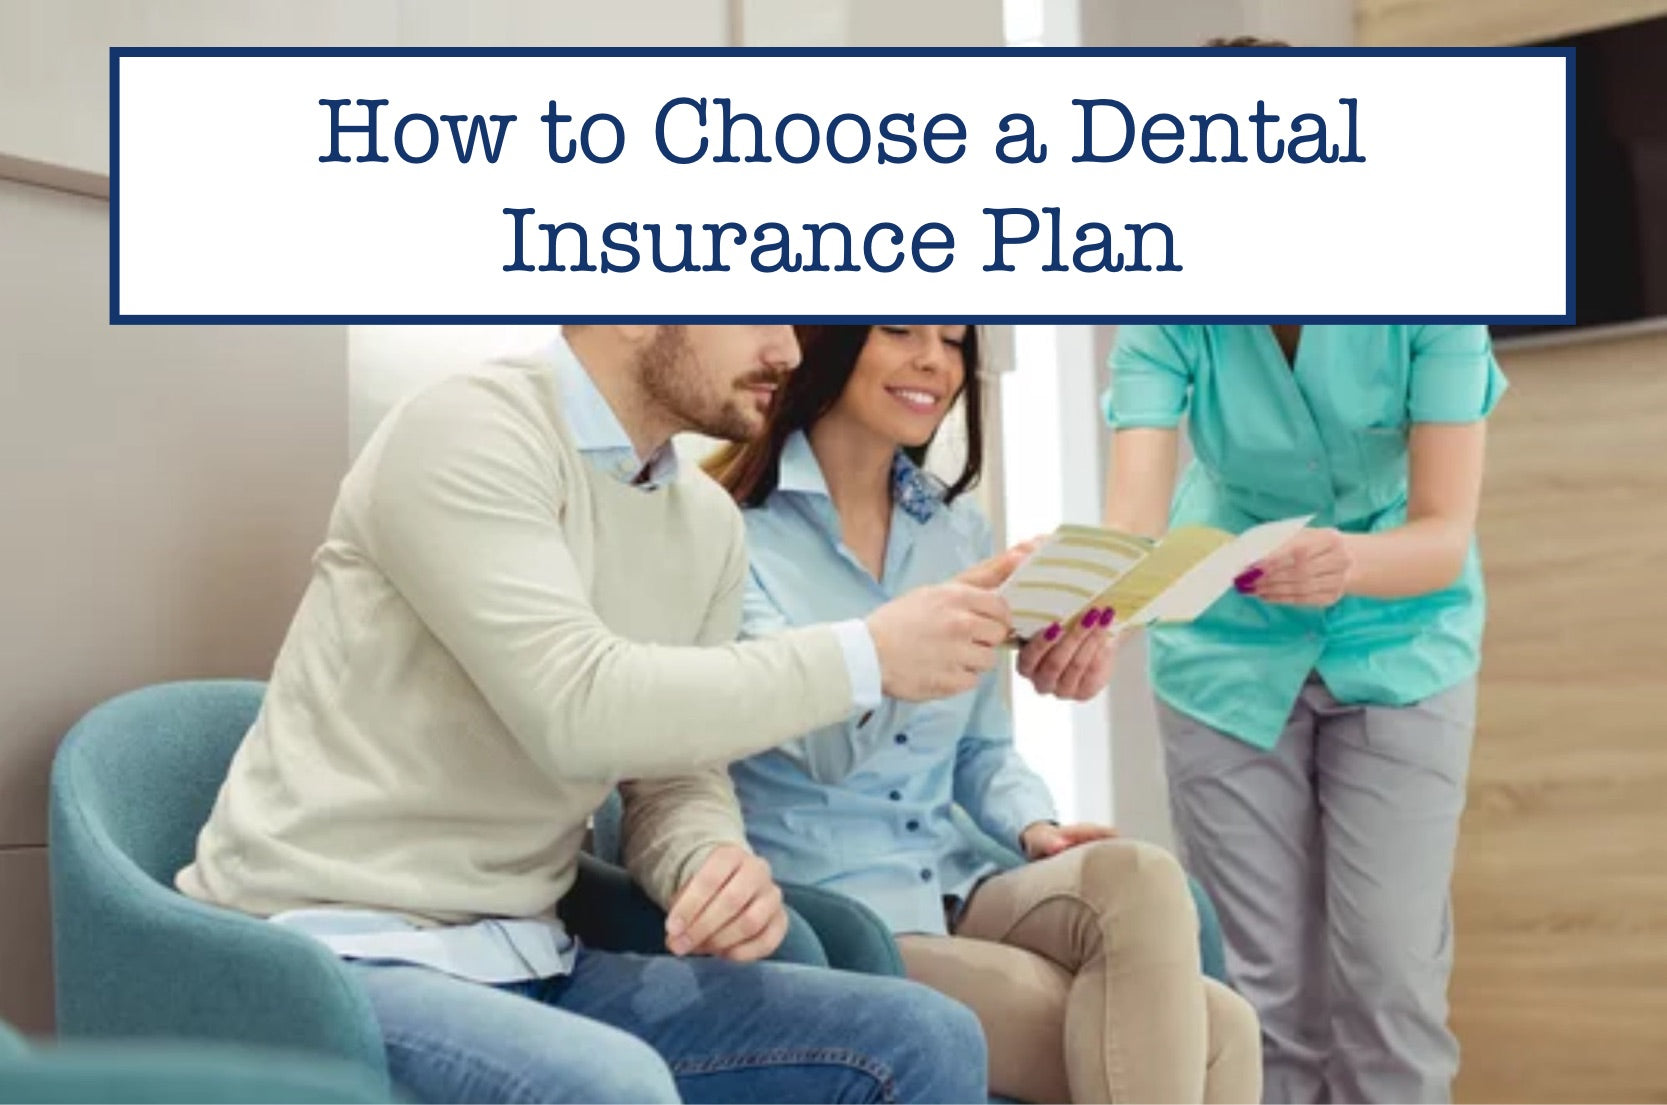 How to Choose a Dental Insurance Plan